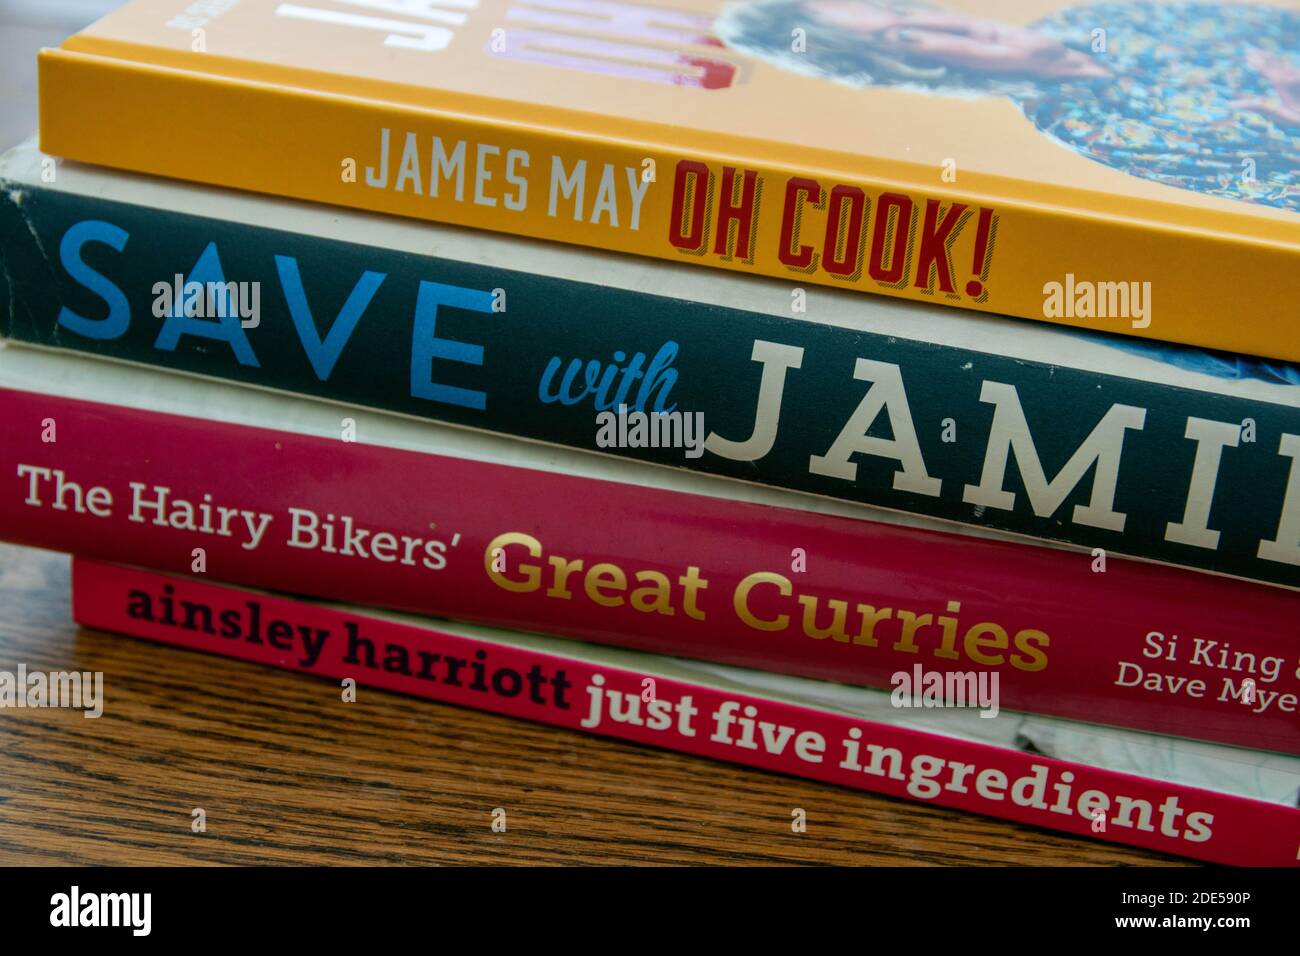 Durham, UK - 17 Nov 2020: Pile of celebrity cookery book, James May, Jamie Oliver, Hairy Bikers and Ainsley Harriott. Home cooking, recipe planning co Stock Photo